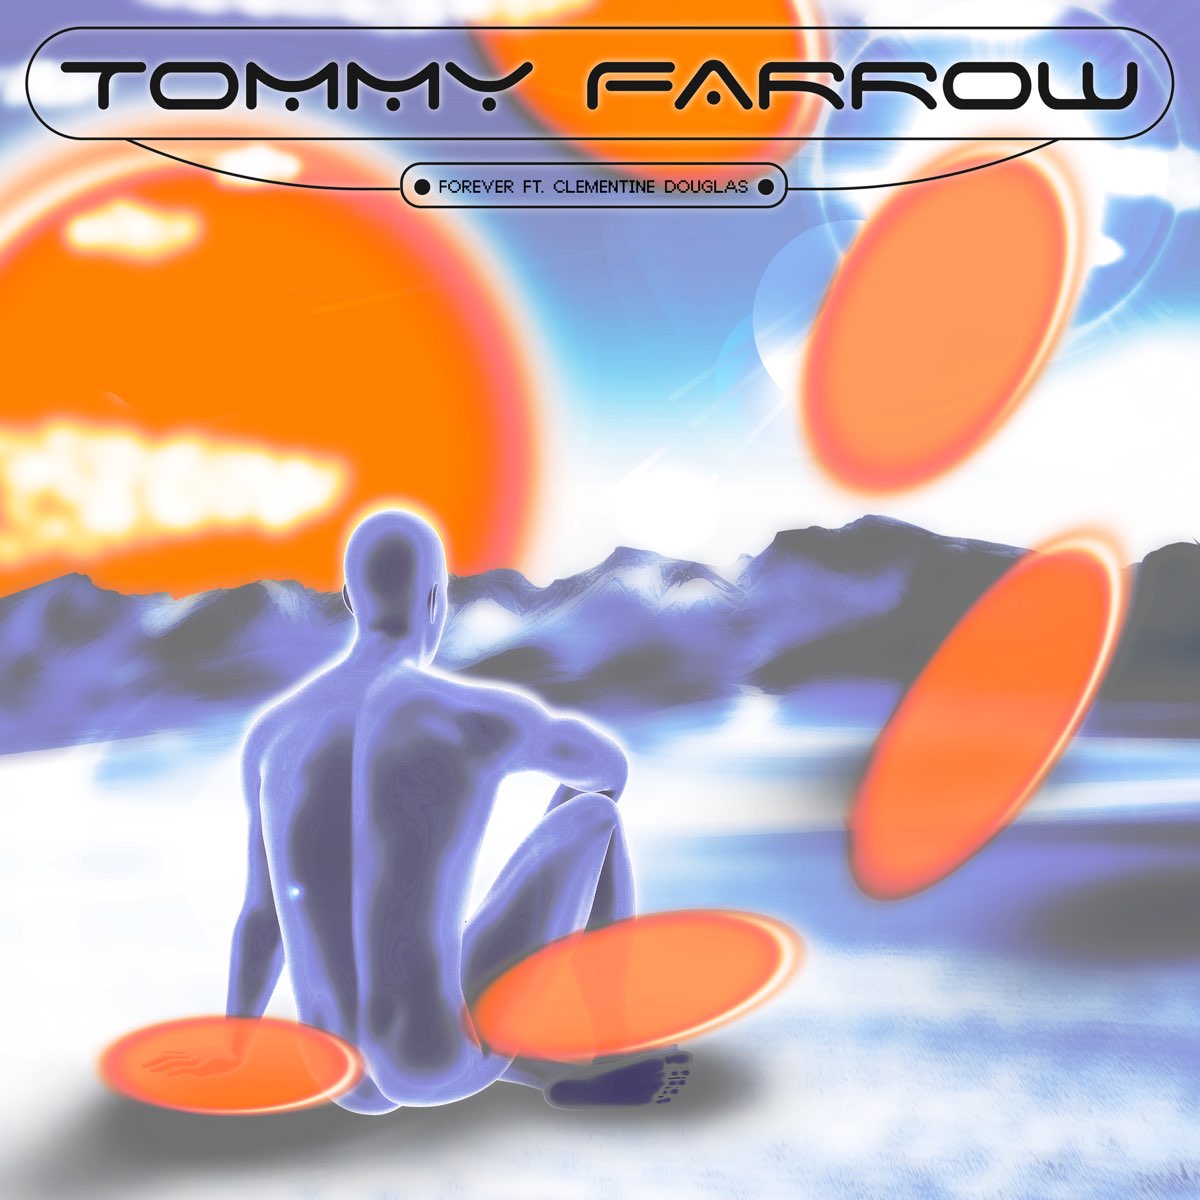 Tommy Farrow ft. featuring Clementine Douglas Forever cover artwork